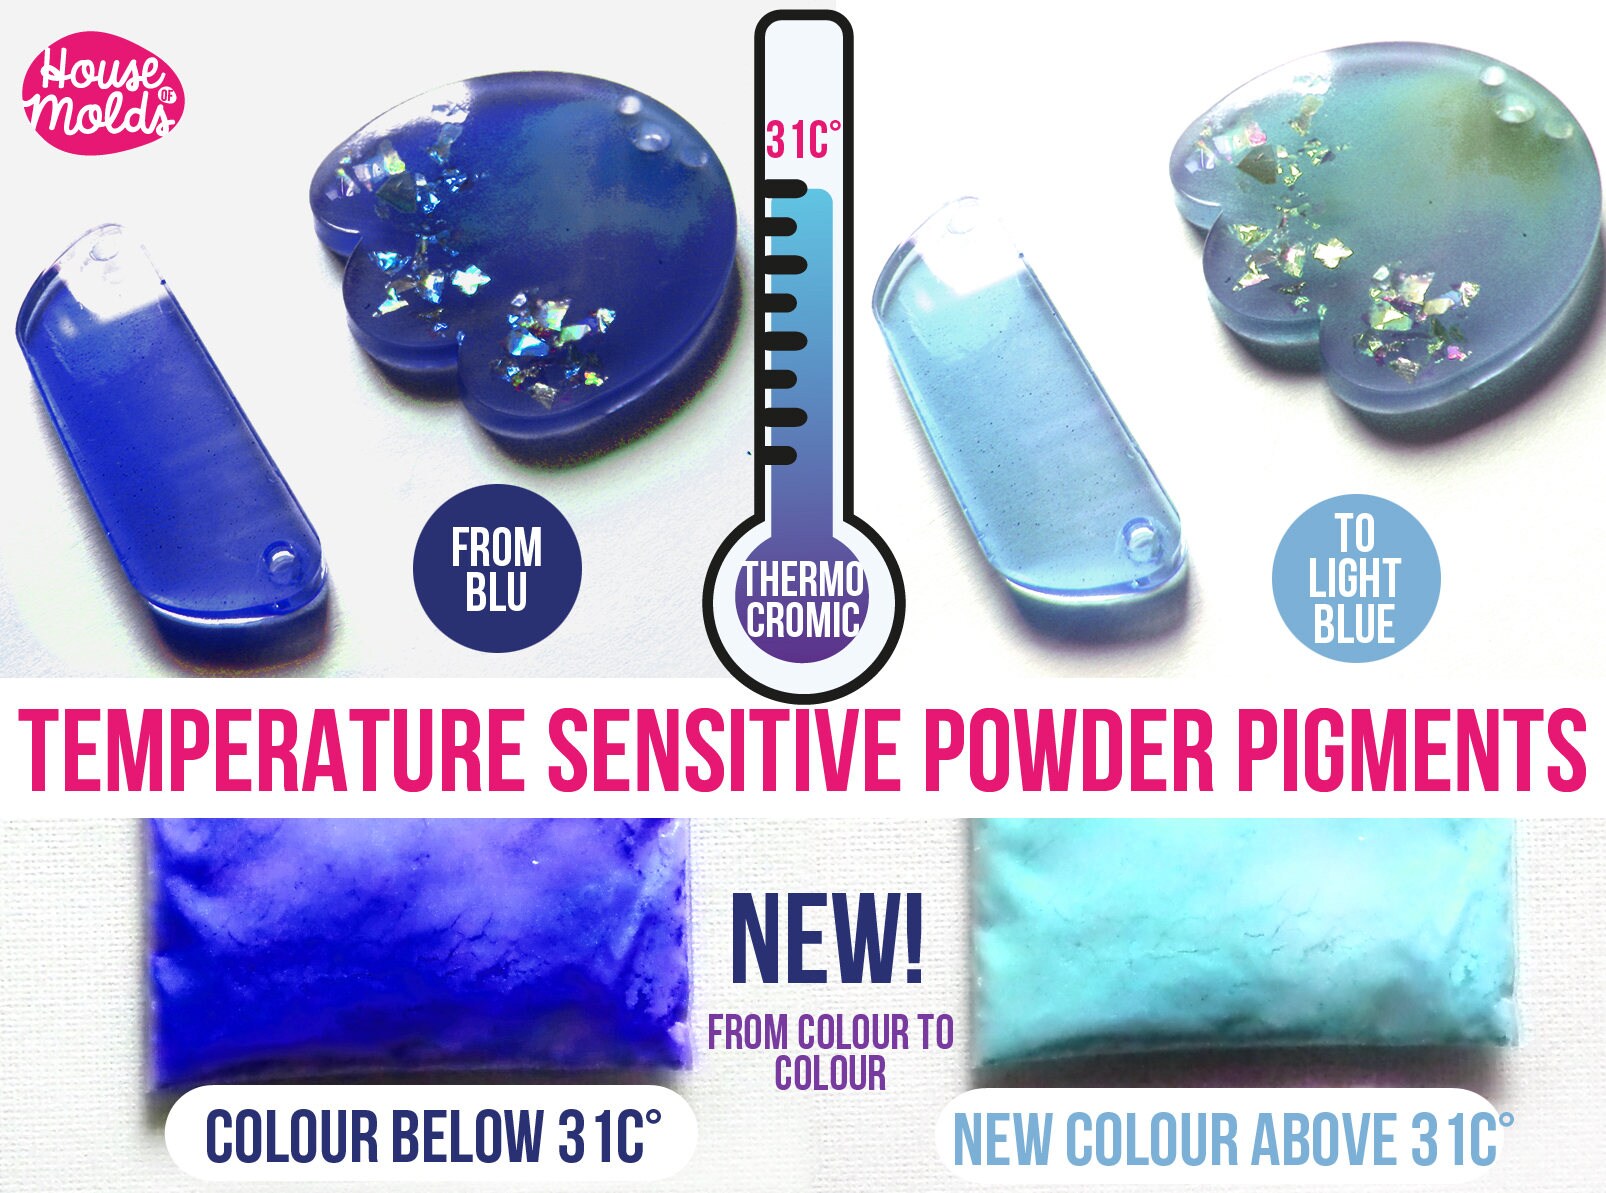 Colour Changing Thermochromic Pigment Trial Pack Colour to Colour 